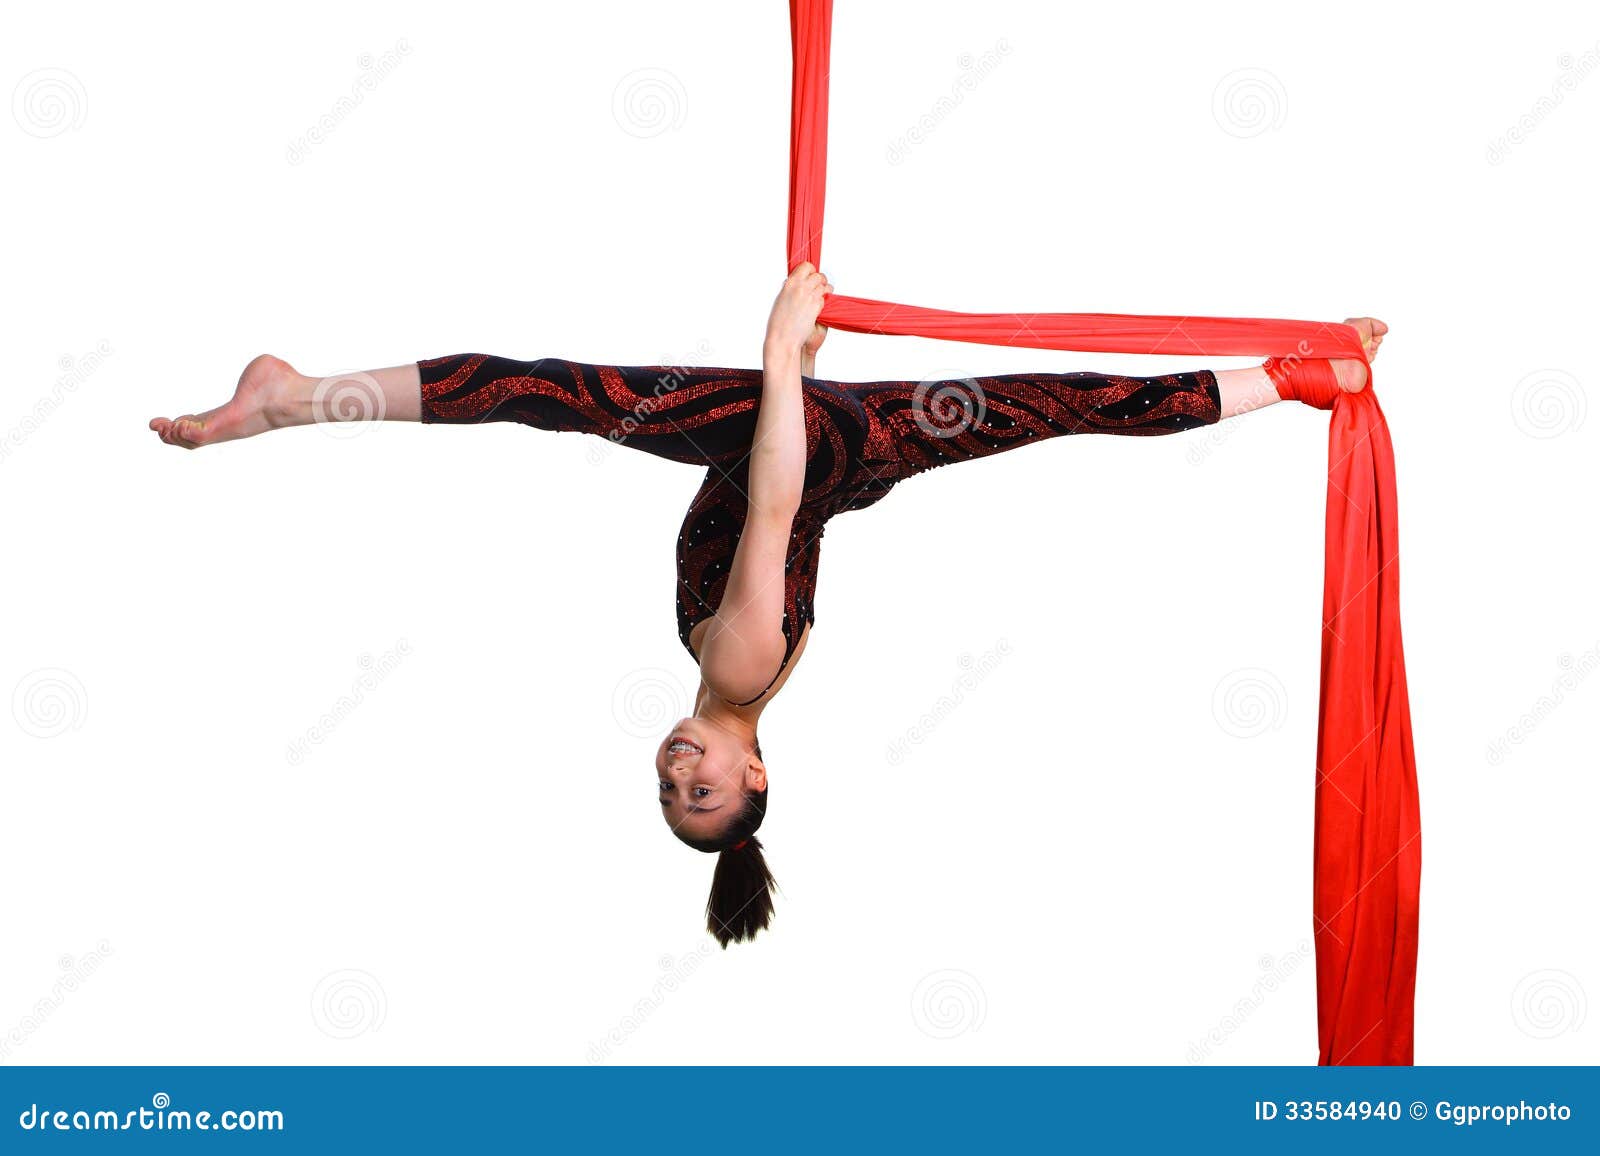 Gymnastic Girl Exercising on Red Fabric Rope Stock Photo - Image